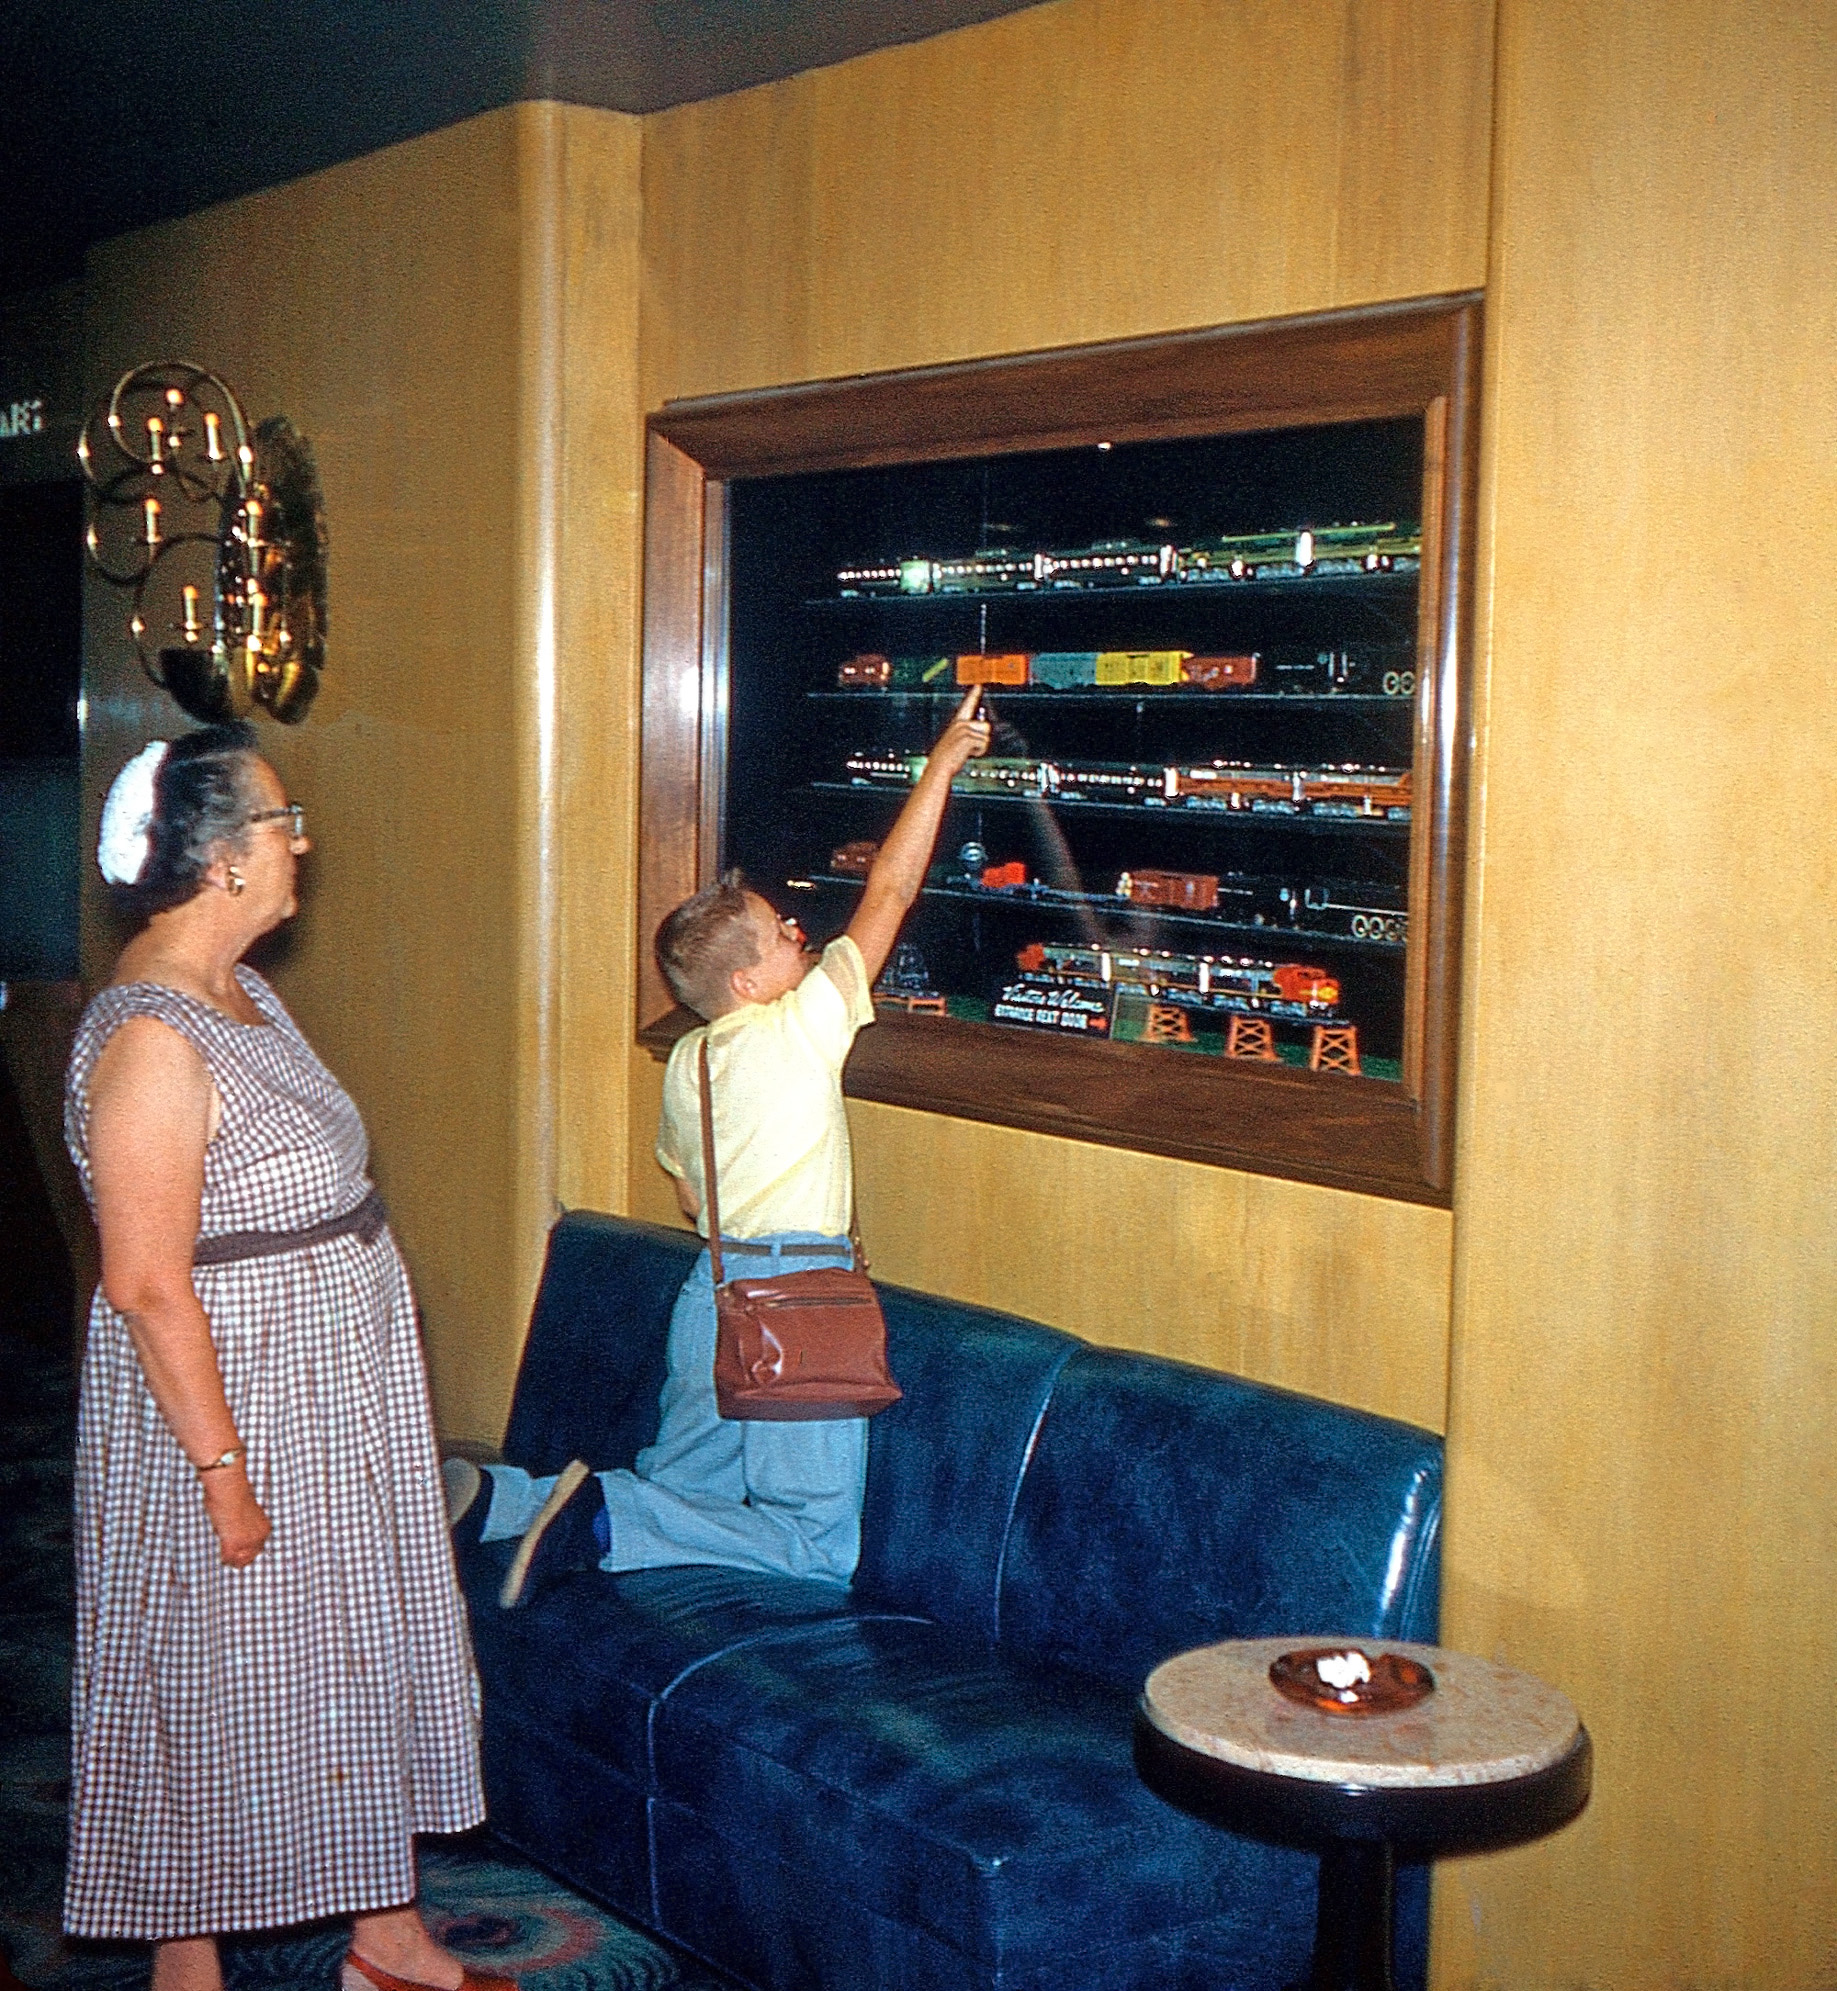 This is the mother and son from the Kodachrome Kitchen,This was taken inside their Hotel, probably in Chicago. Based on the comments written on this and other slides I know they took a train trip from Los Angeles to Chicago. This is one side of a Kodachrome stereo pair. View full size.